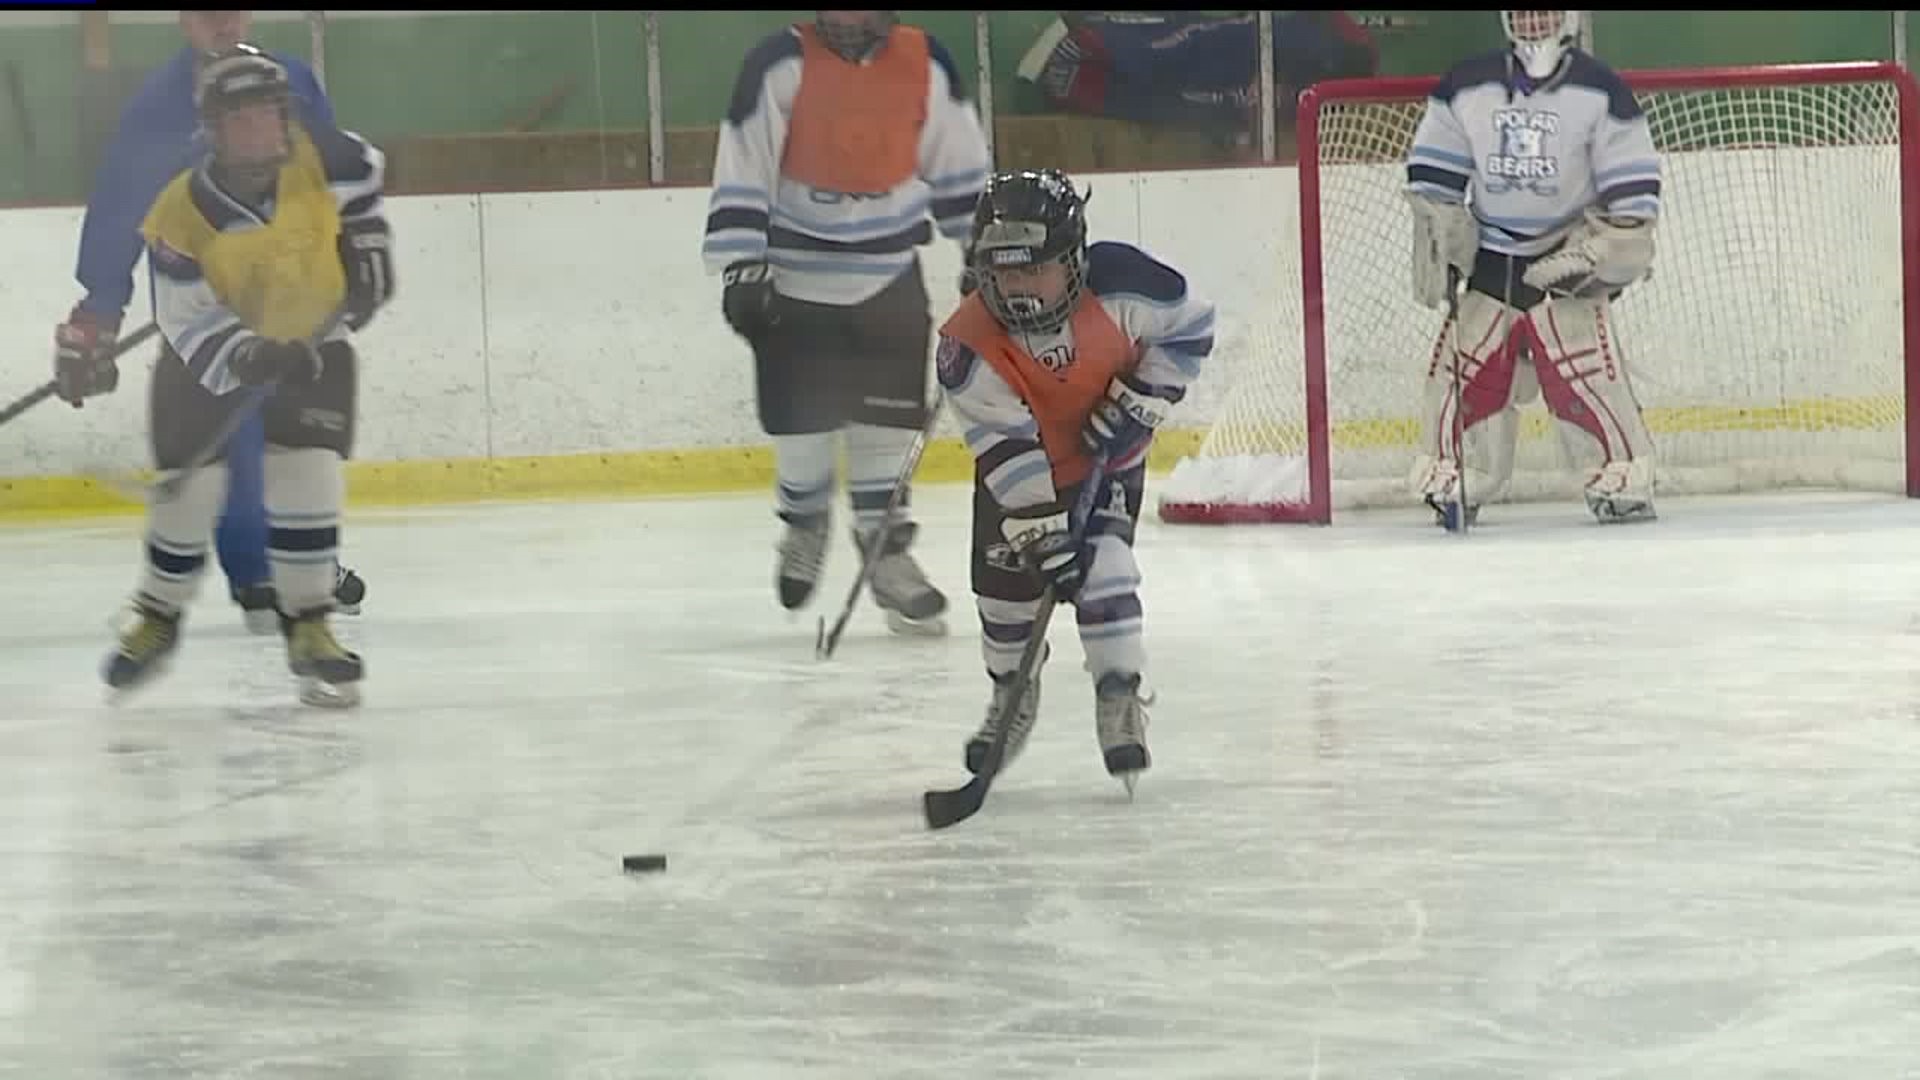 York Polar Bears hockey team takes to the ice for first home game of season